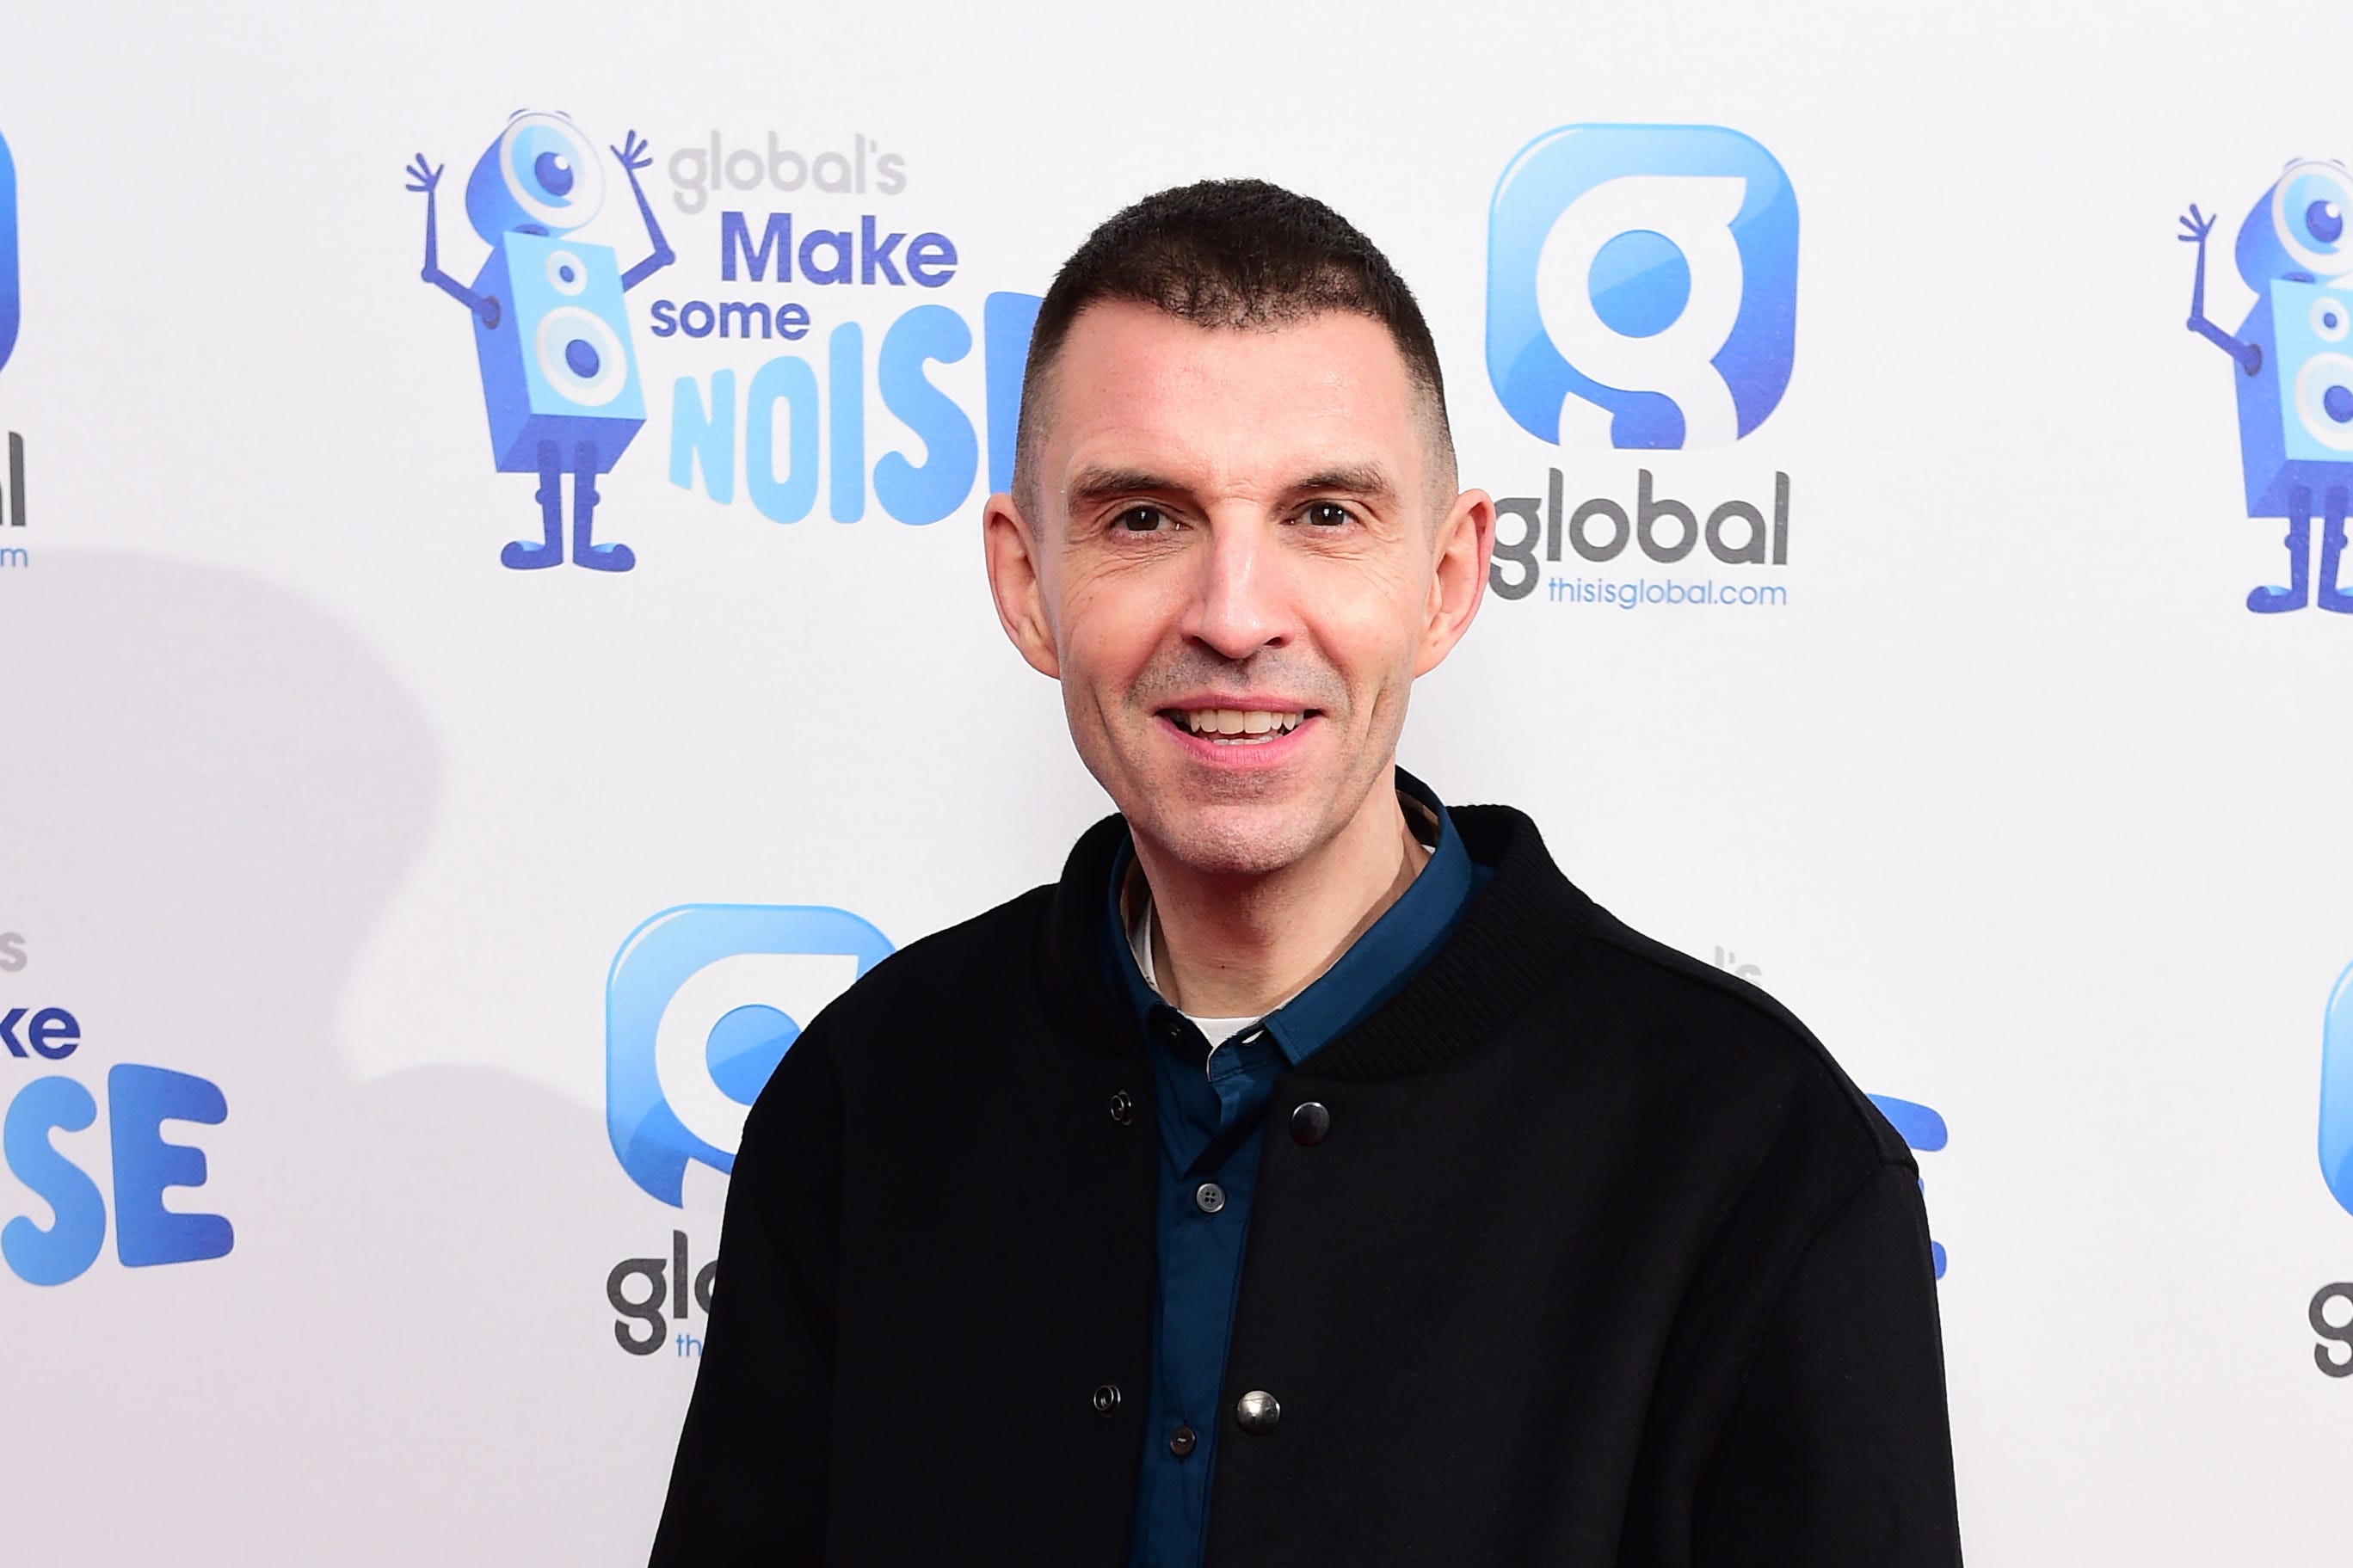 Tim Westwood has been interviewed for a fourth time under police caution